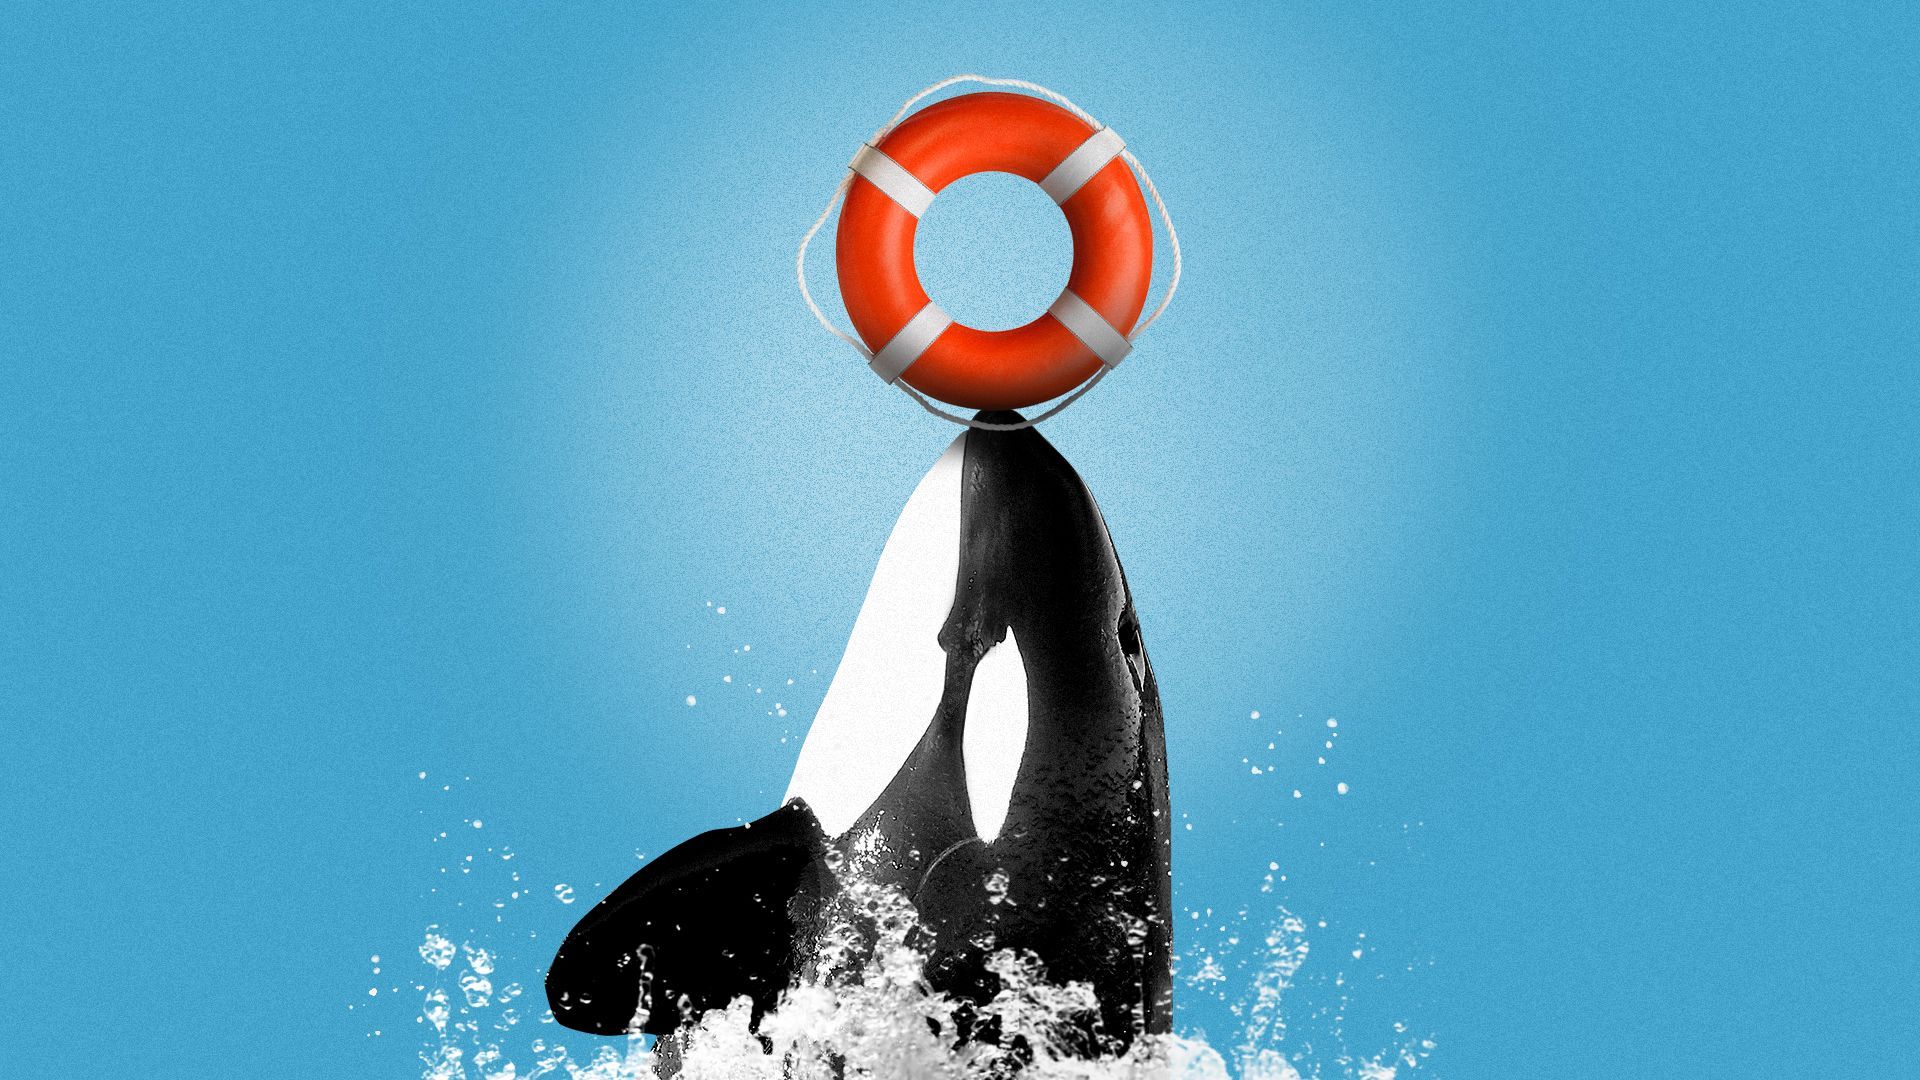 Illustration of a killer whale balancing a life preserver on its nose.